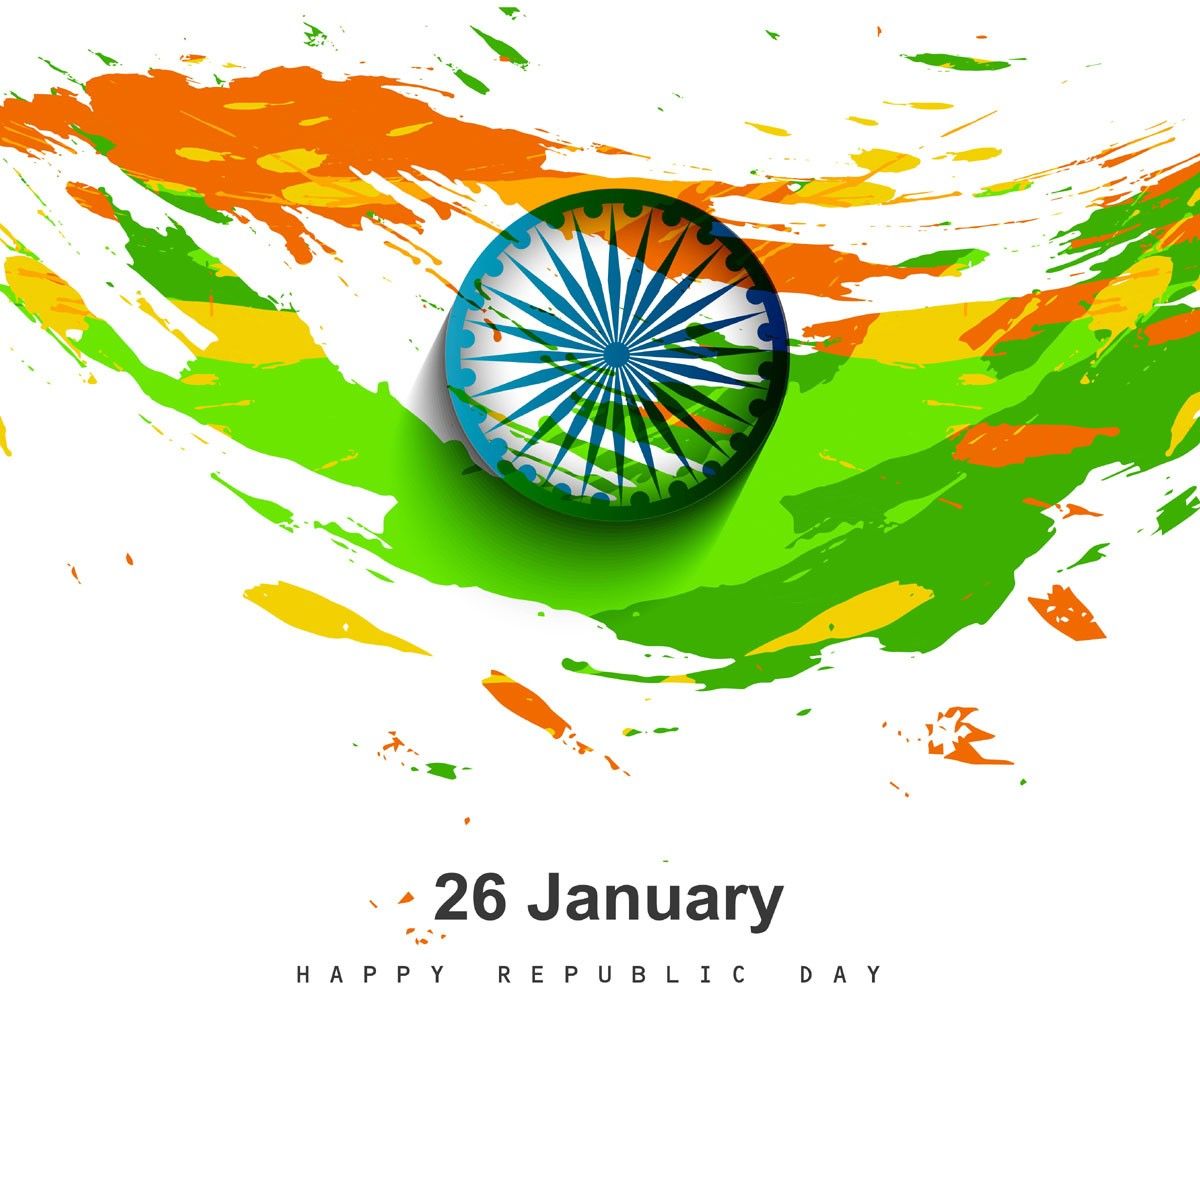 Happy Republic Day Hd Wallpaper And Wishes Card Of - Independence Day India 2018 , HD Wallpaper & Backgrounds